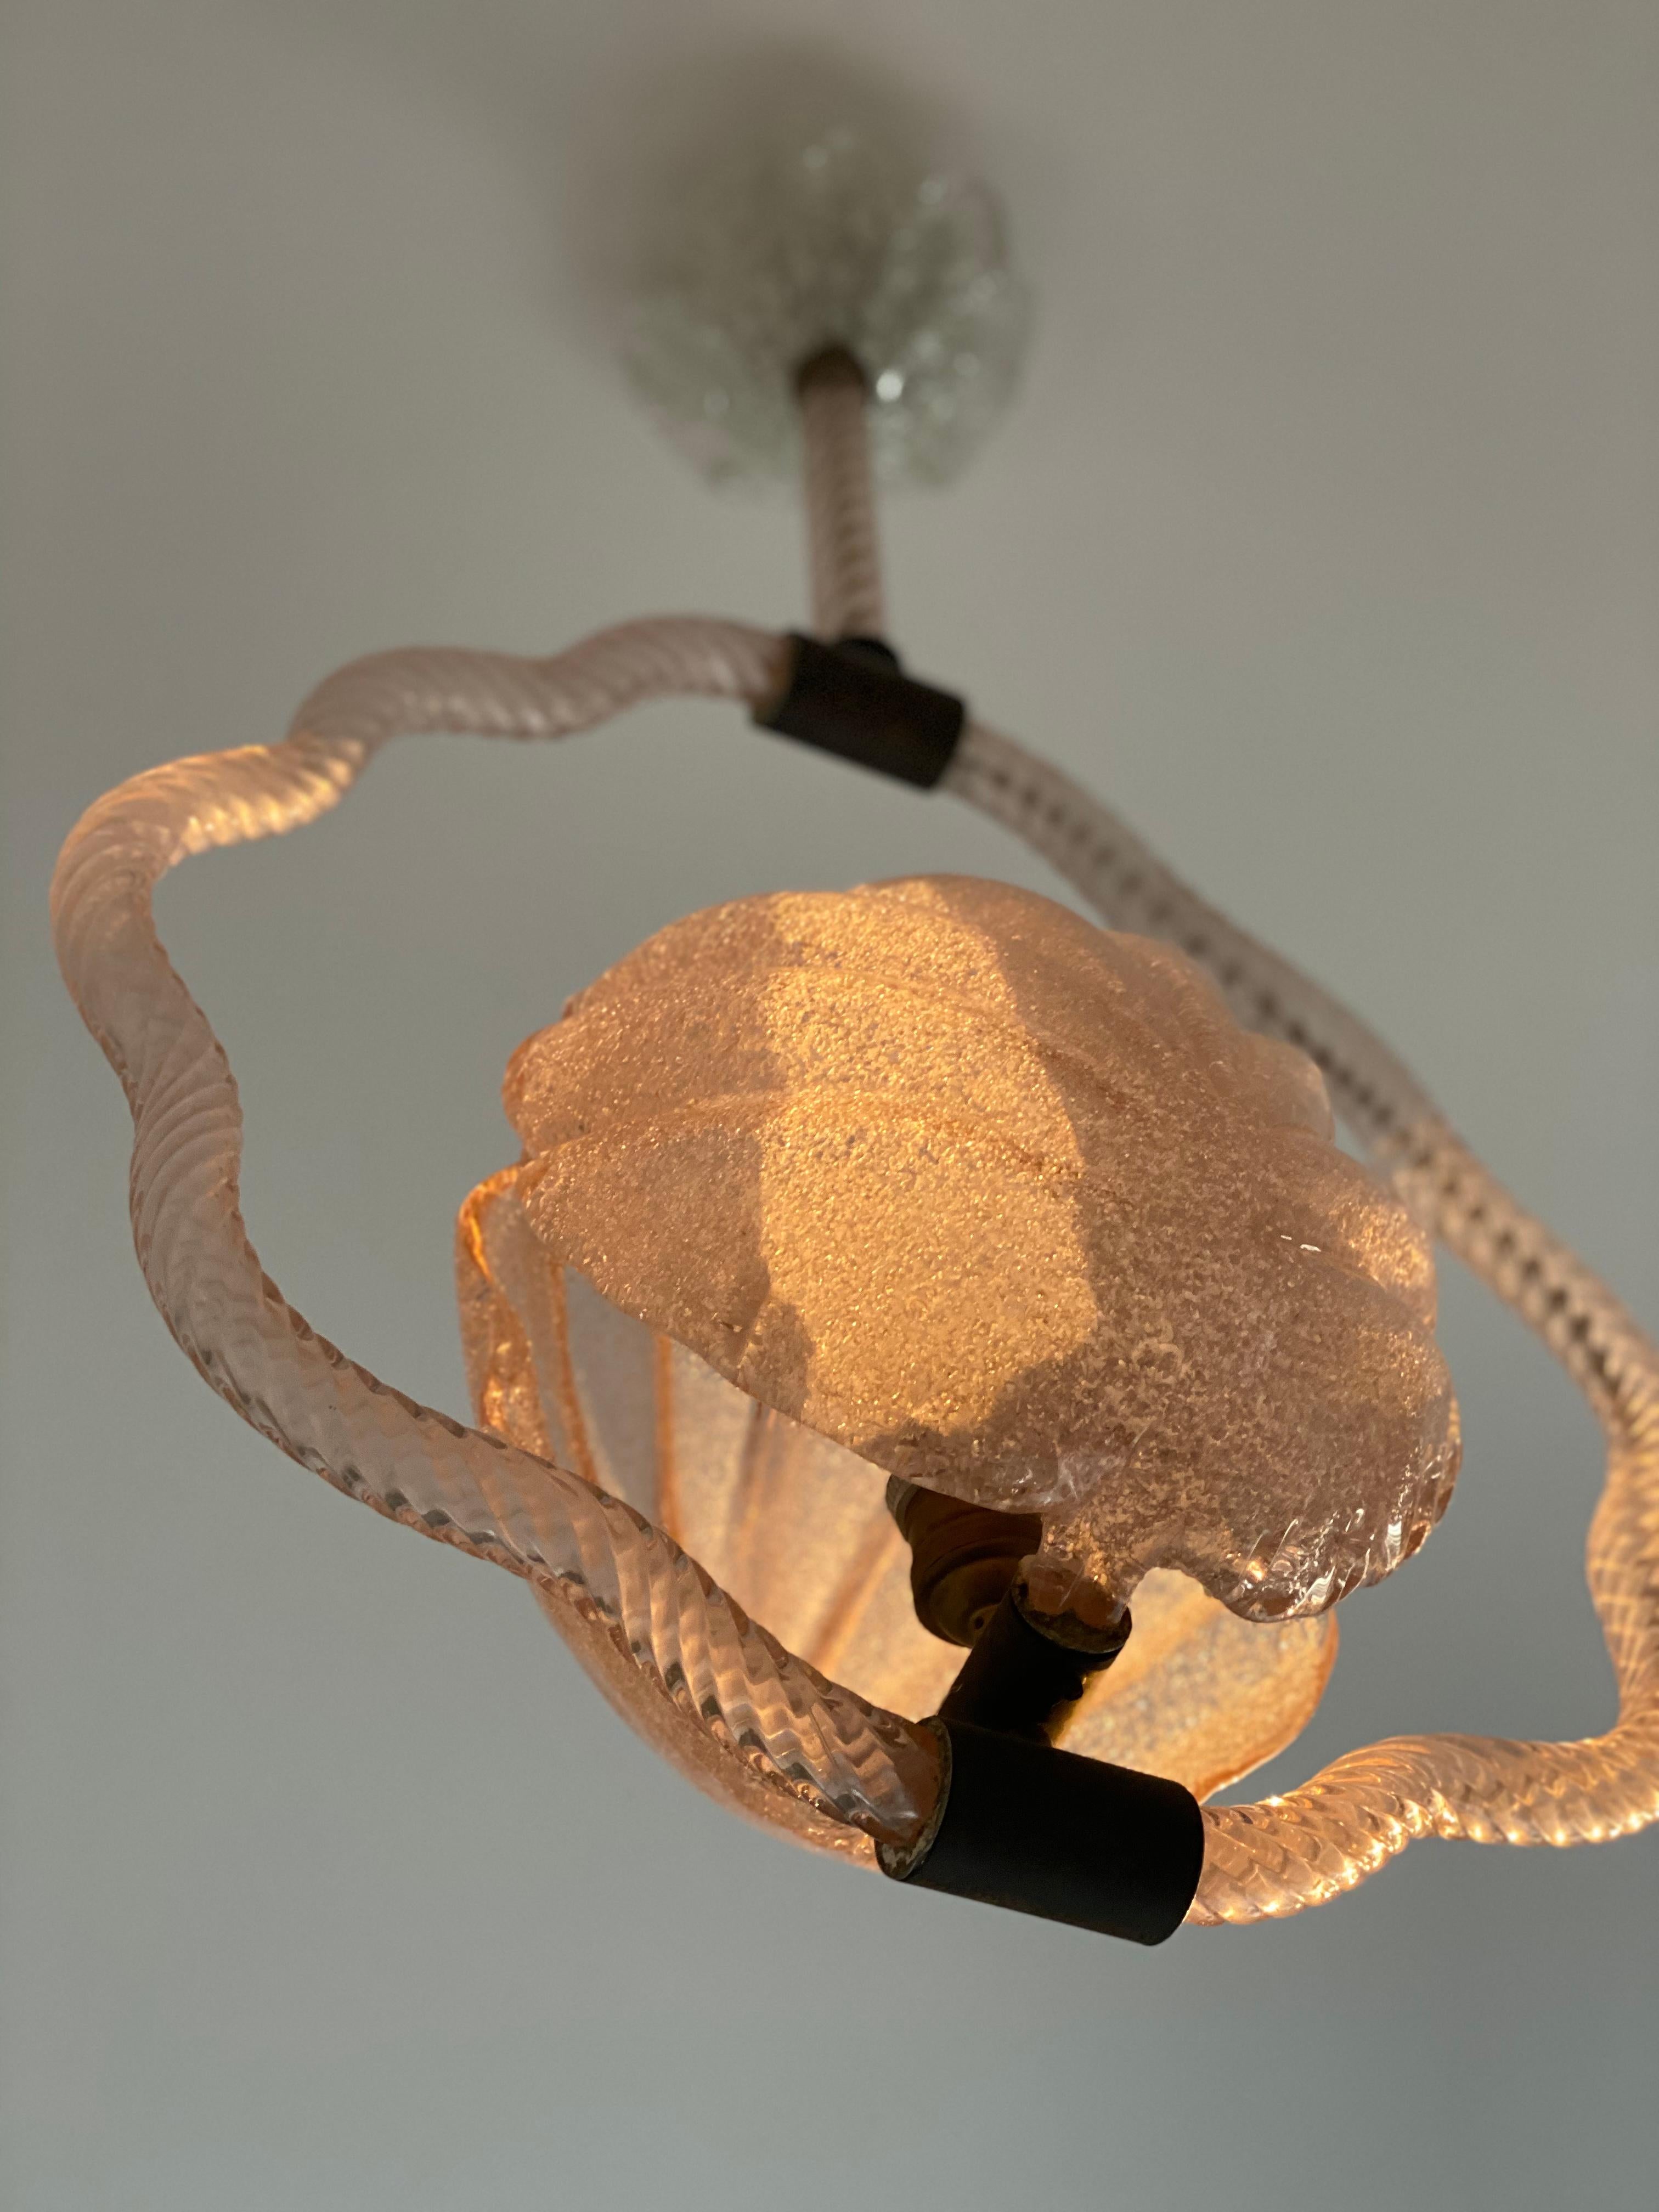 The Vintage Chandelier by Barovier & Toso showcases a central cup in seashell form with rare pink glass, bringing coastal beauty and natural elegance to the space, evoking the soothing qualities of the ocean.
The captivating design includes a